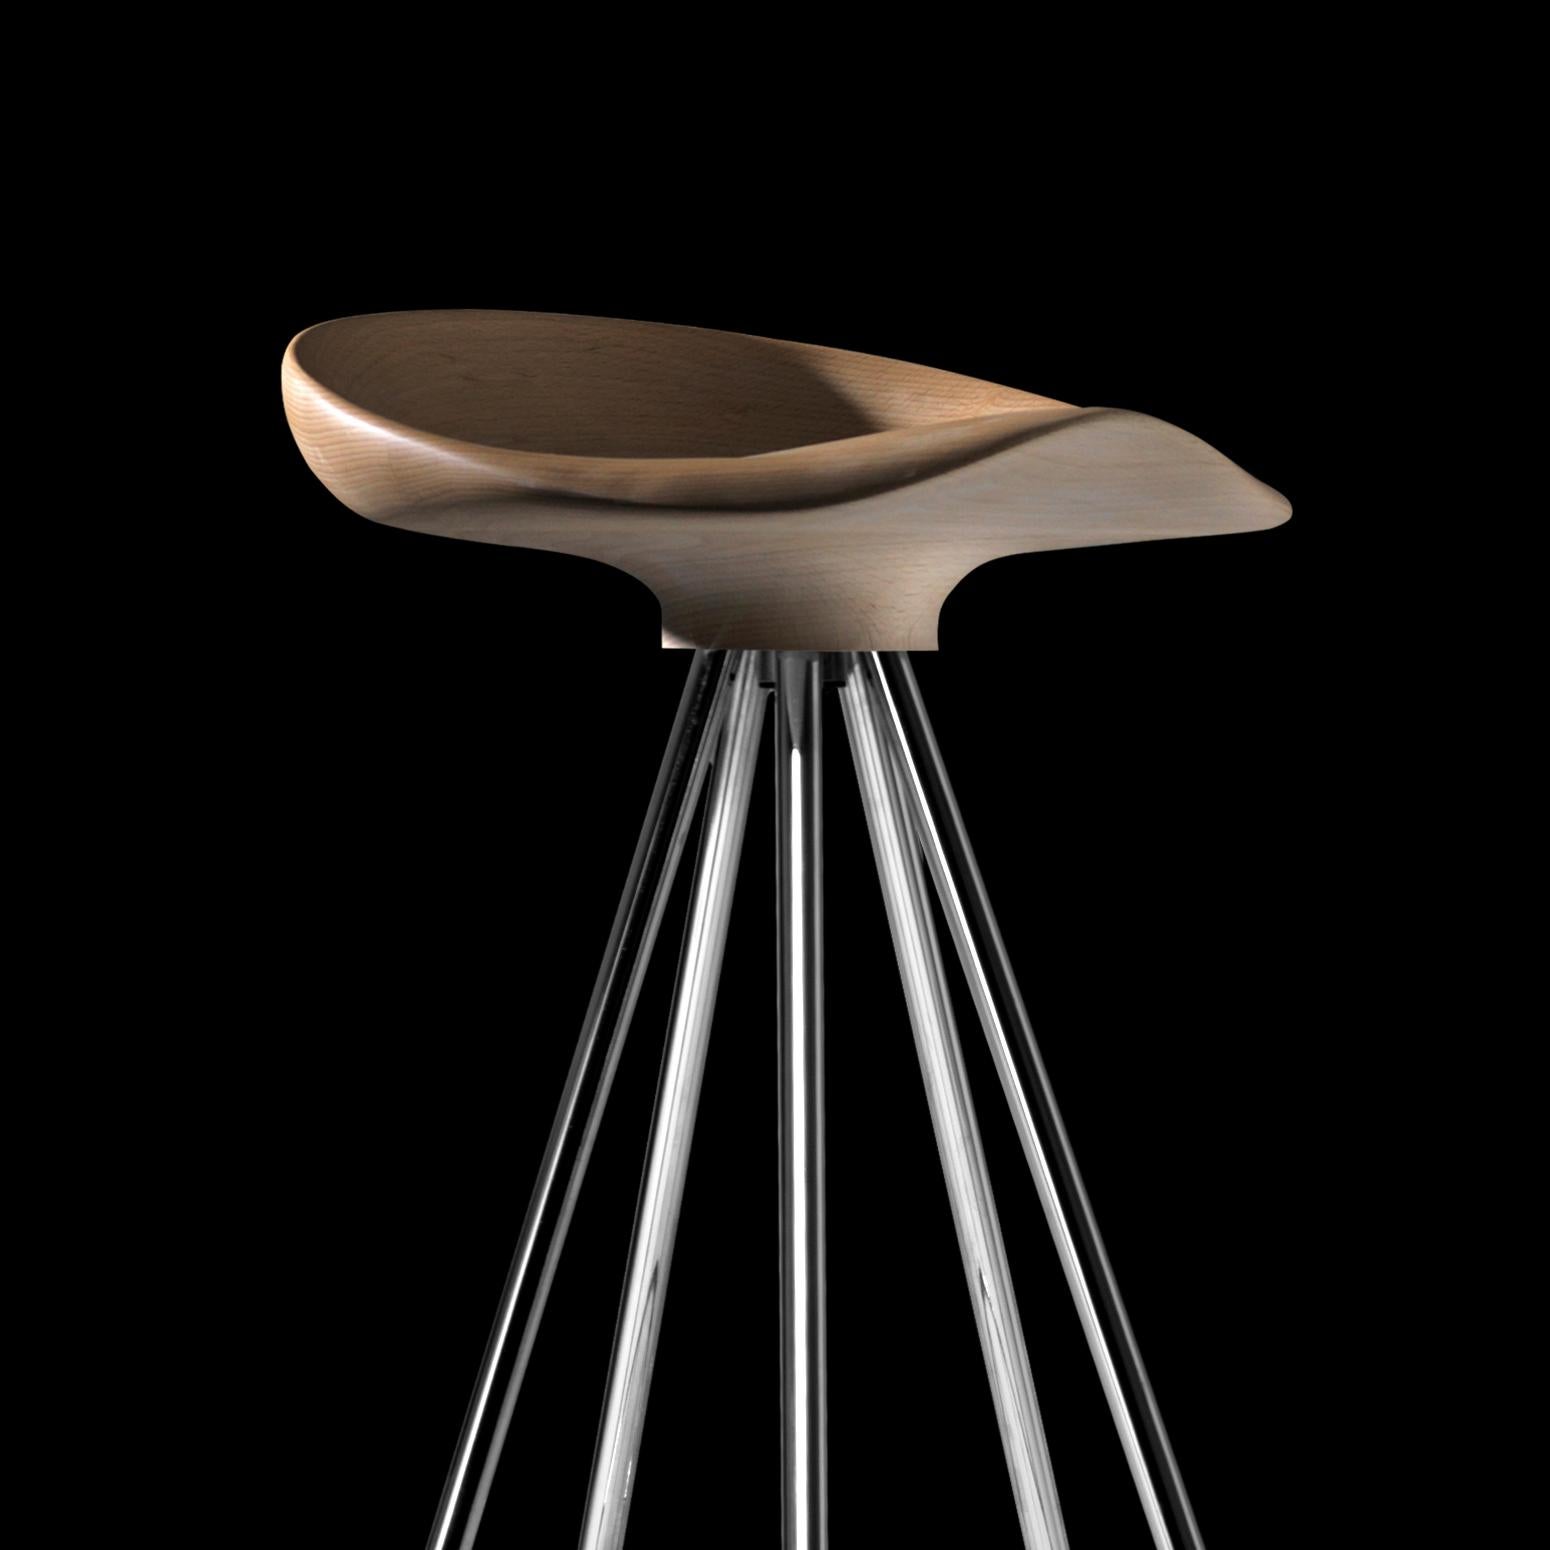 Jamaica stool designed by Pepe Cortes.
Manufactured by BD Barcelona

The Jamaica stool is already a classic in Spanish design and is one of the best designed stools in all history. It’s been on the market for over 25 years and remains as current